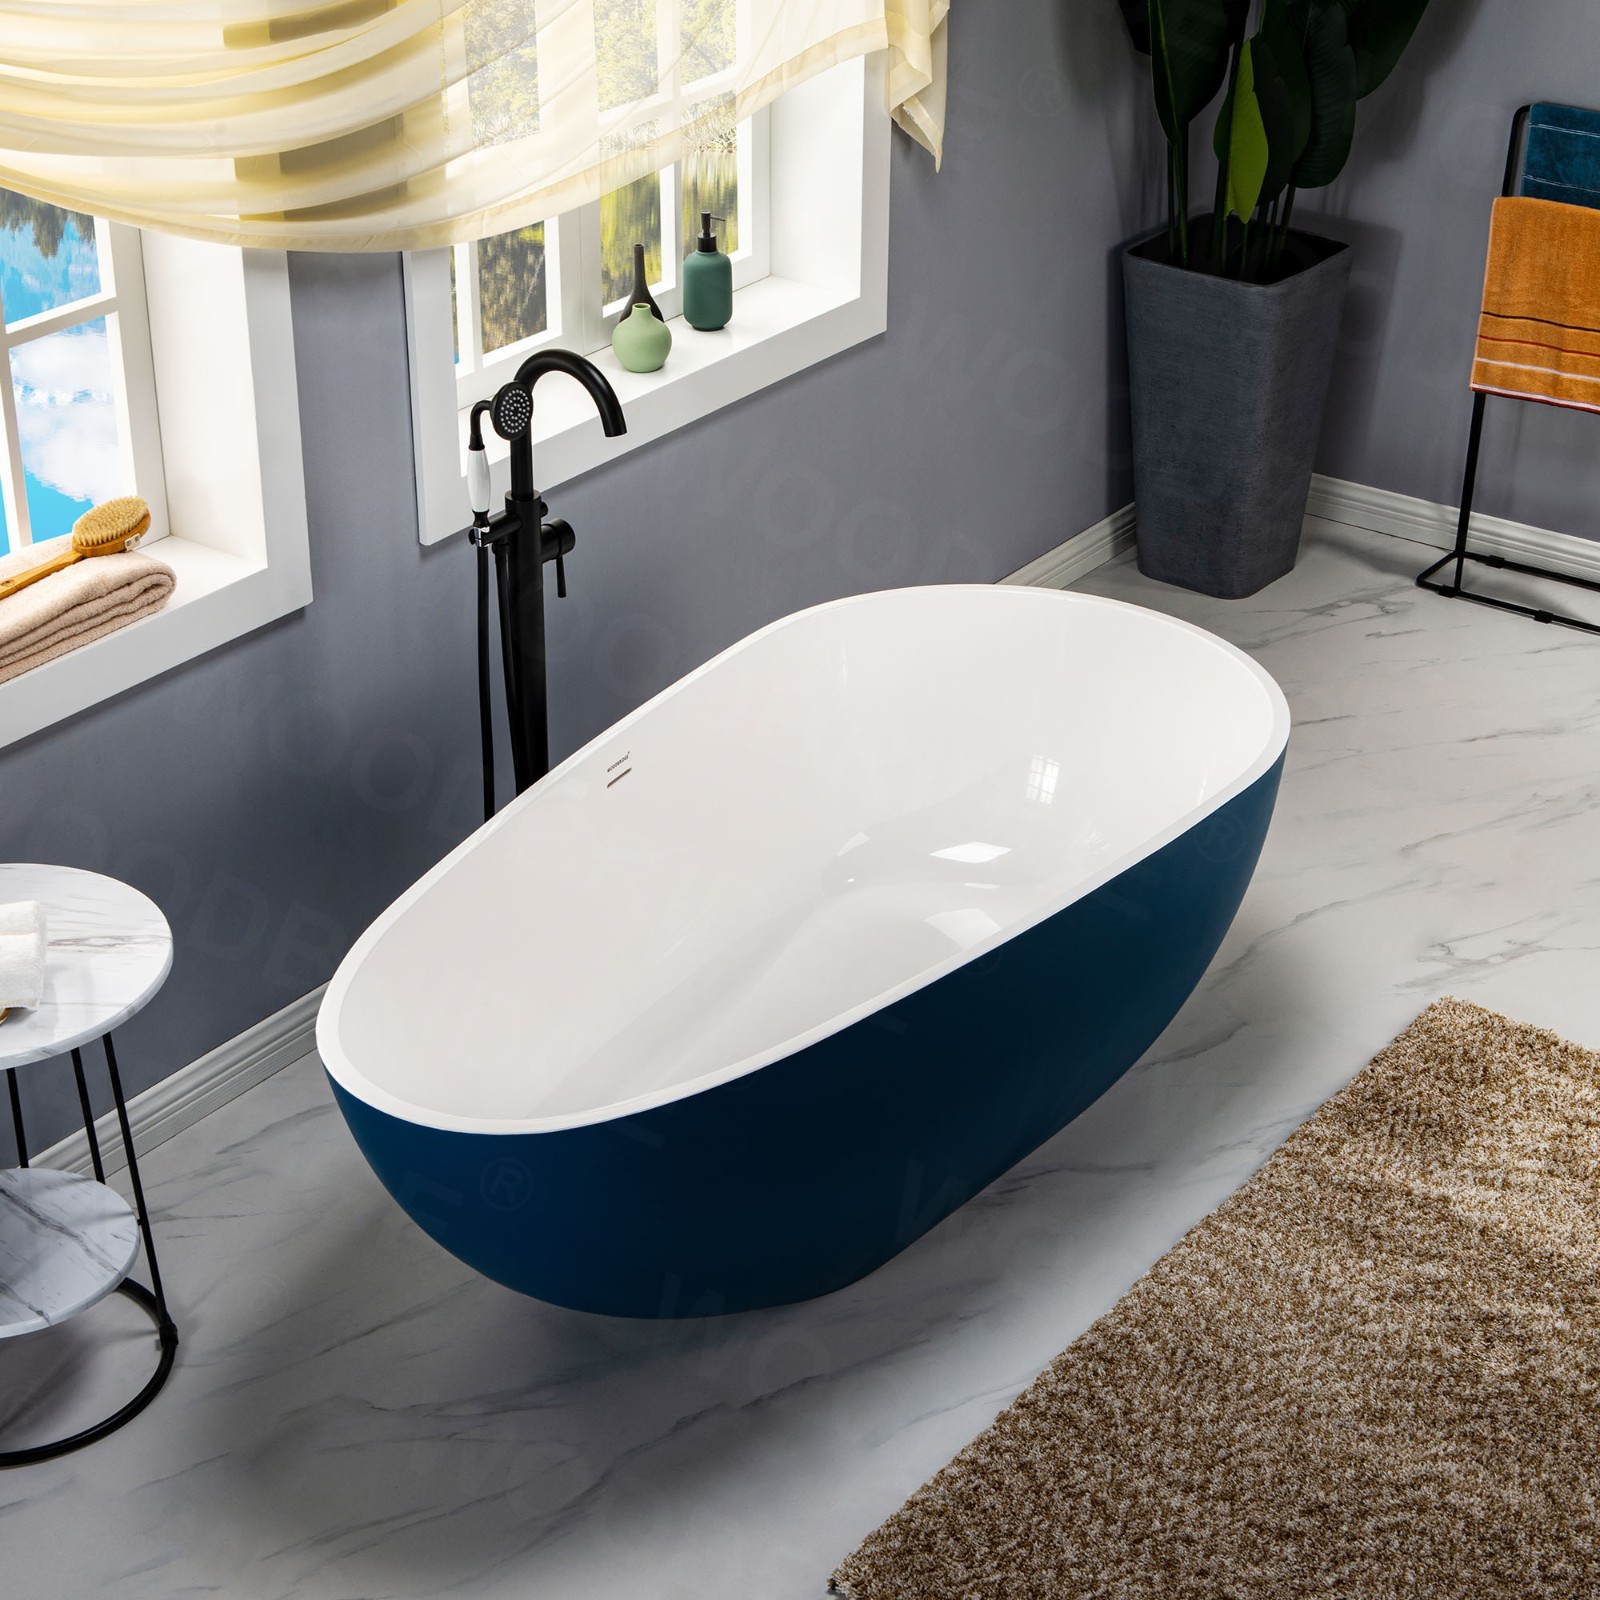  WOODBRIDGE 67 in. Freestanding Double Ended Solid Surface Soaking Bathtub with Center Drain Assembly and Overflow, BTA0053/BTA0053, Glossy White (Inside) Satin Blue (Outside)_8368